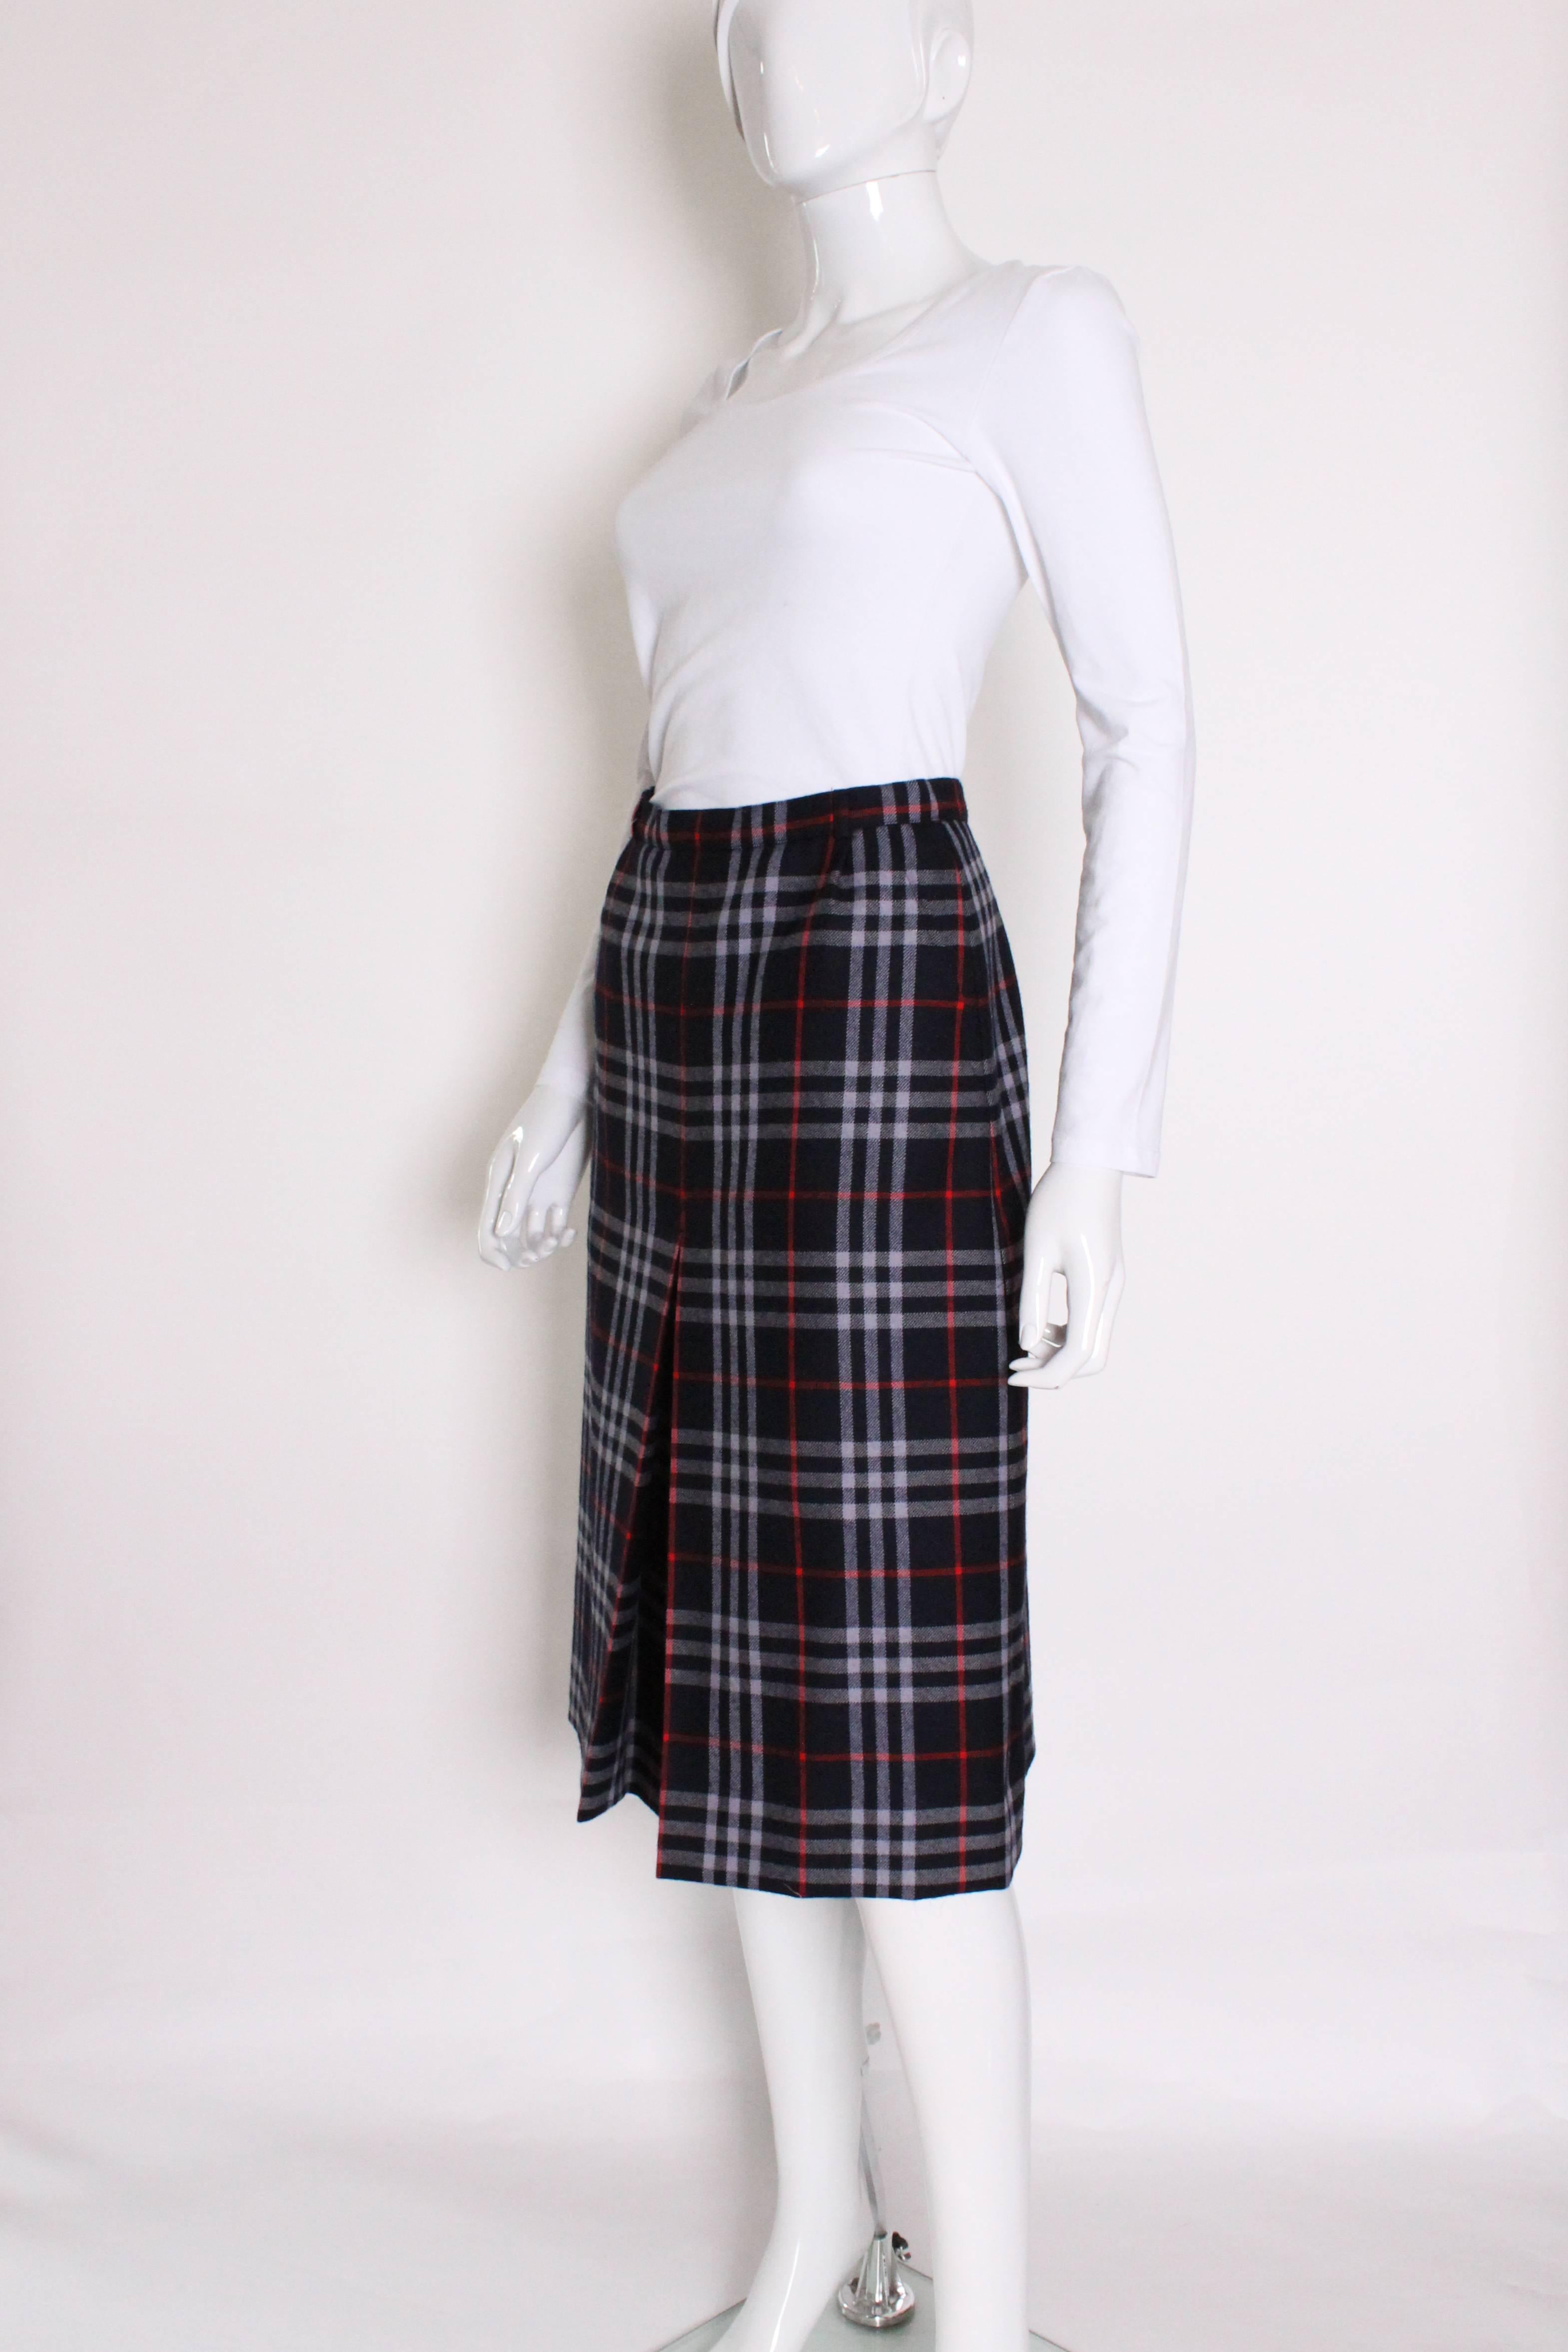 An English classic, a check wool skirt from British fashion house Burberry.
This skirt has a navy background , with a red and pale blue check.
There is a central front pleat, 2 sloping pockets on the front and a central back zip. The skirt has